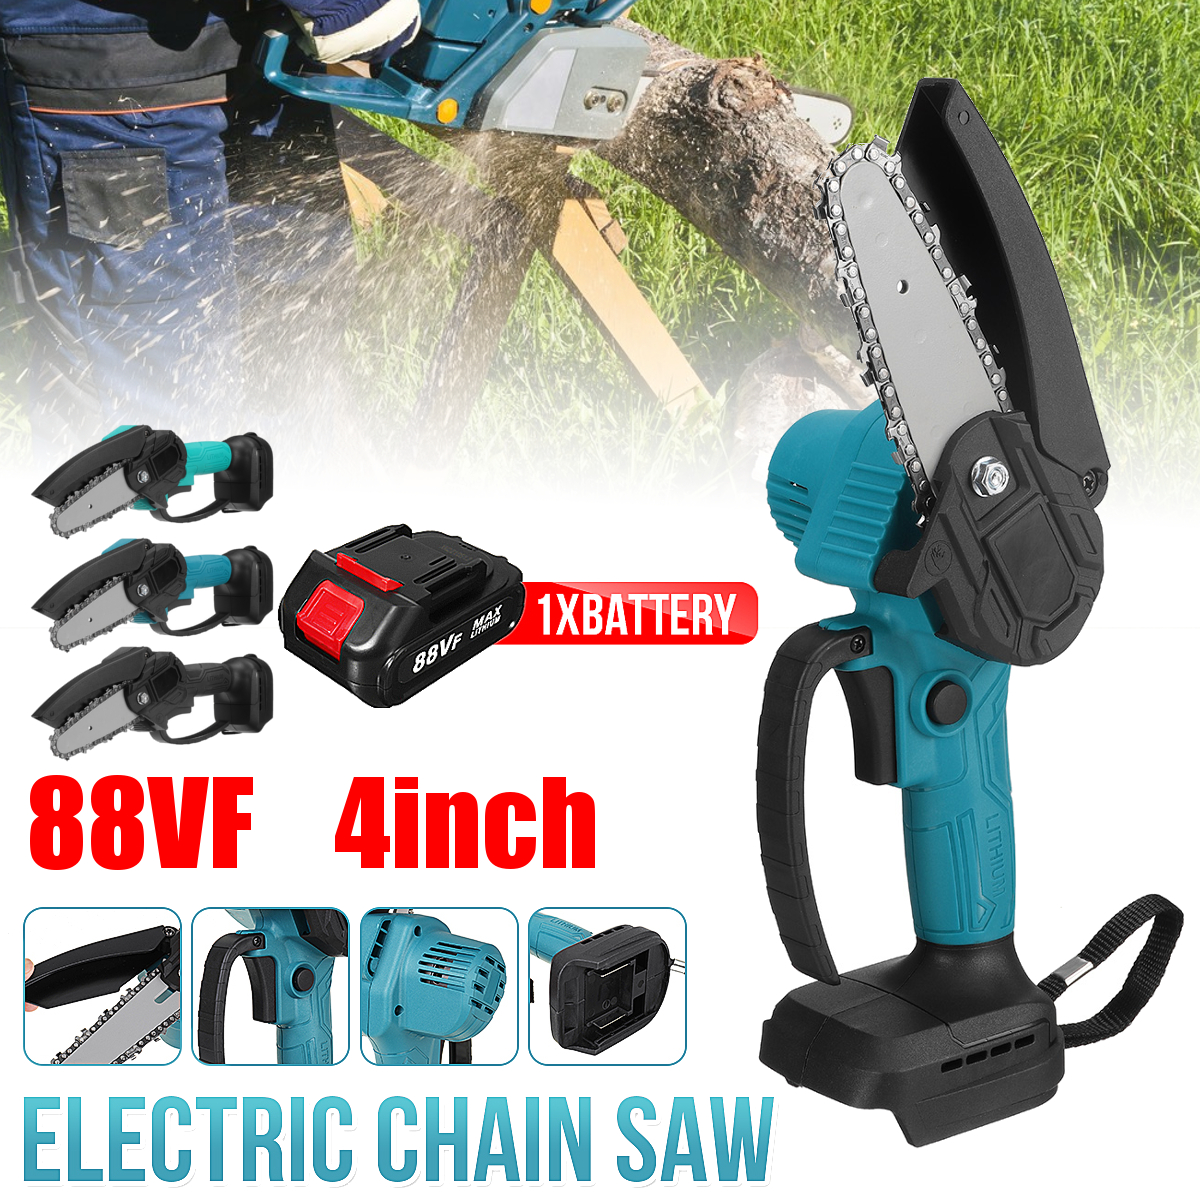 88VF-4-Inch-Cordless-Electric-Chain-Saw-Cordless-Chainsaw-Multi-function-Woodworking-Wood-Cutter-W-B-1861027-2